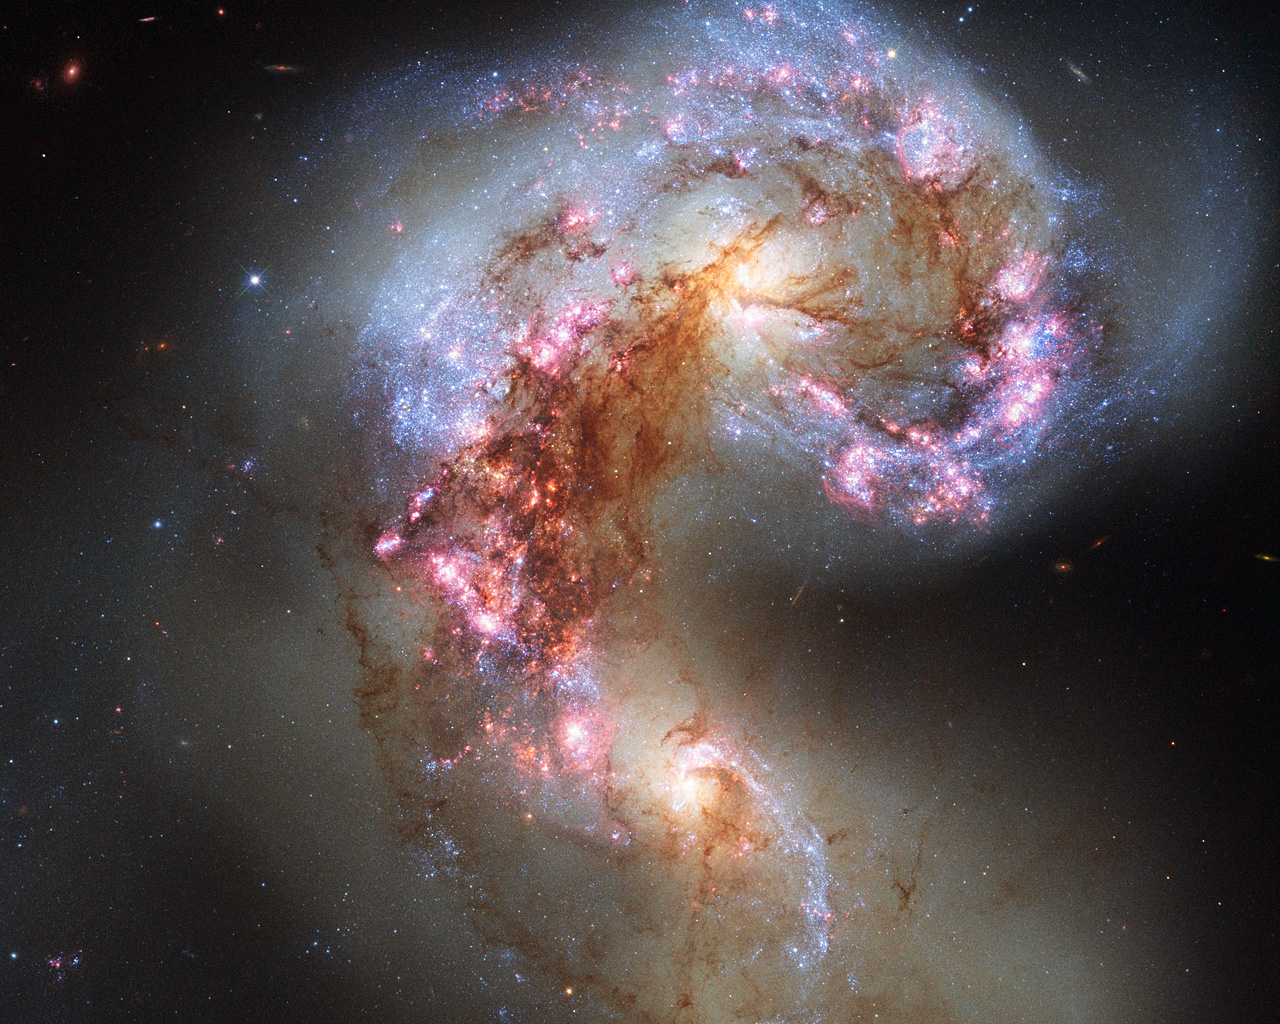 The NASA/ESA Hubble Space Telescope has snapped the best ever image of the Antennae Galaxies. Hubble has released images of these stunning galaxies twice before, once using observations from its Wide Field and Planetary Camera 2 (WFPC2) in 1997, and again in 2006 from the Advanced Camera for Surveys (ACS). Each of Hubble’s images of the Antennae Galaxies has been better than the last, due to upgrades made during the famous servicing missions, the last of which took place in 2009. The galaxies — also known as NGC 4038 and NGC 4039 — are locked in a deadly embrace. Once normal, sedate spiral galaxies like the Milky Way, the pair have spent the past few hundred million years sparring with one another. This clash is so violent that stars have been ripped from their host galaxies to form a streaming arc between the two. In wide-field images of the pair the reason for their name becomes clear — far-flung stars and streamers of gas stretch out into space, creating long tidal tails reminiscent of antennae. This new image of the Antennae Galaxies shows obvious signs of chaos. Clouds of gas are seen in bright pink and red, surrounding the bright flashes of blue star-forming regions — some of which are partially obscured by dark patches of dust. The rate of star formation is so high that the Antennae Galaxies are said to be in a state of starburst, a period in which all of the gas within the galaxies is being used to form stars. This cannot last forever and neither can the separate galaxies; eventually the nuclei will coalesce, and the galaxies will begin their retirement together as one large elliptical galaxy. This image uses visible and near-infrared observations from Hubble’s Wide Field Camera 3 (WFC3), along with some of the previously-released observations from Hubble’s Advanced Camera for Surveys (ACS).